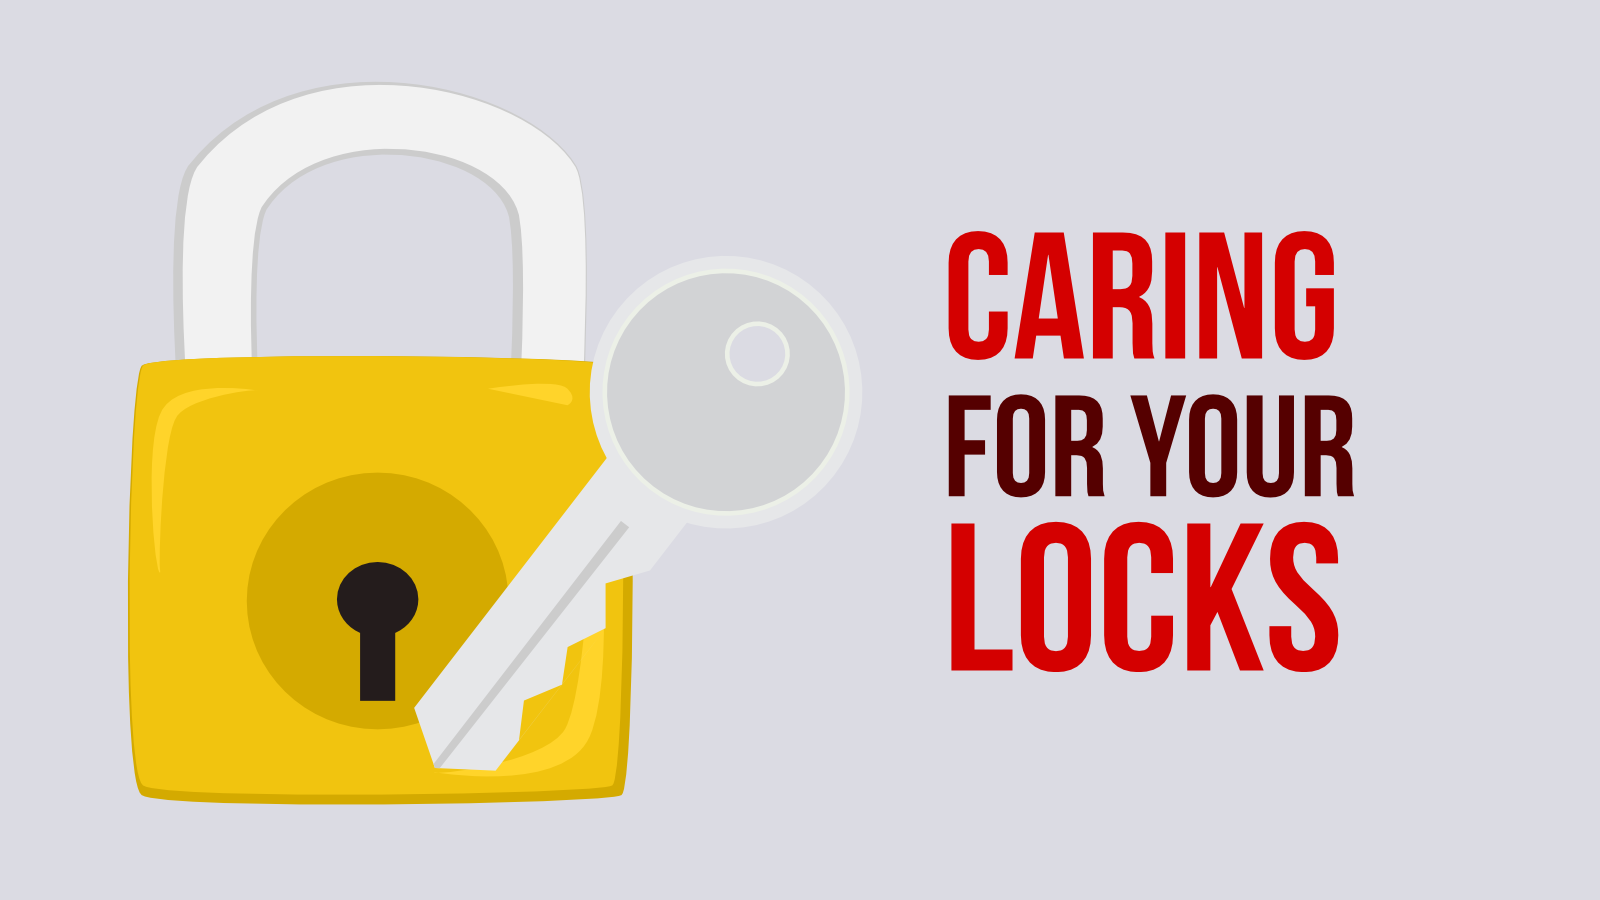 Caring for Your Locks: Tips from a Pro Locksmith